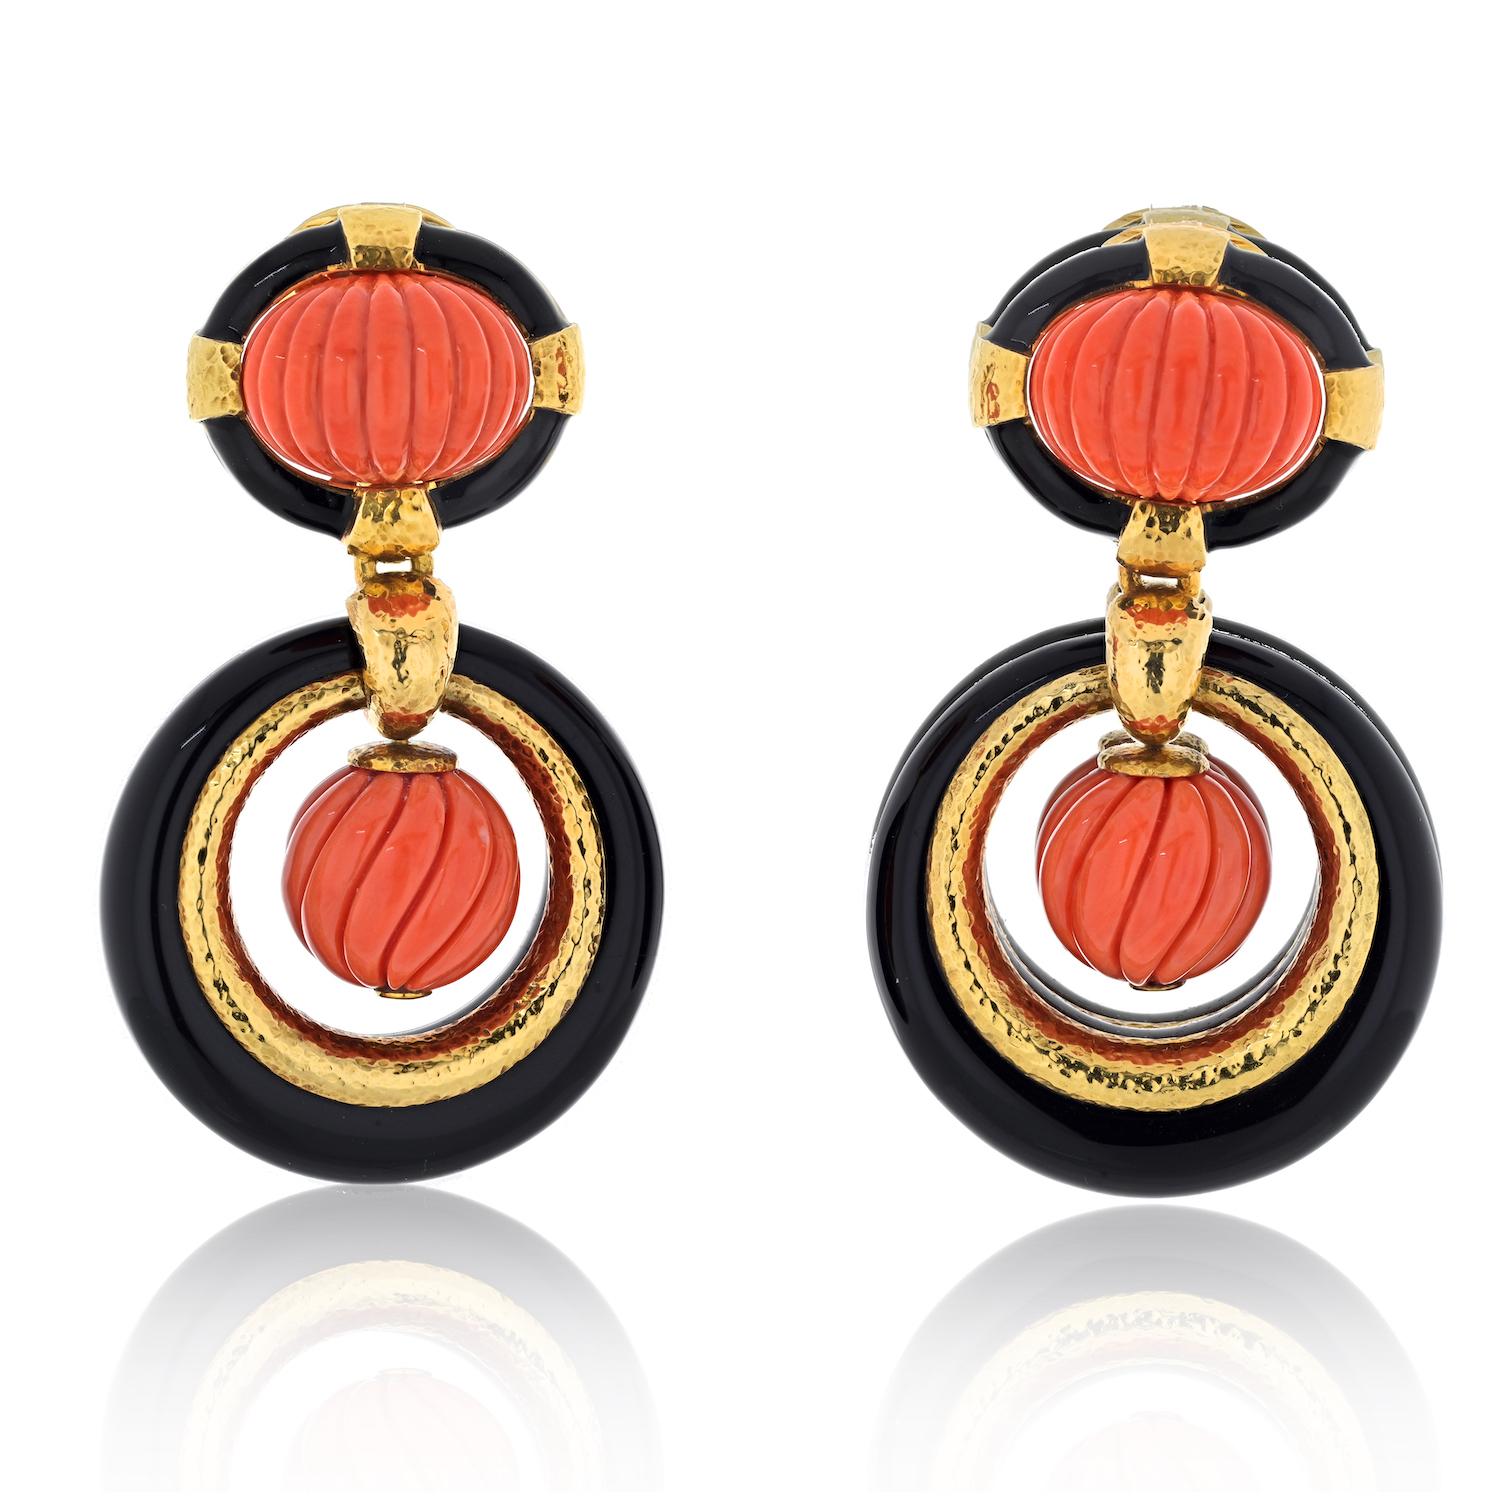 The David Webb Platinum & 18K Yellow Gold Carved Coral Onyx Door Knockers Earrings are a remarkable testament to the designer's distinctive artistry. Crafted with a keen eye for detail, these earrings harmoniously blend carved coral, onyx, and 18K